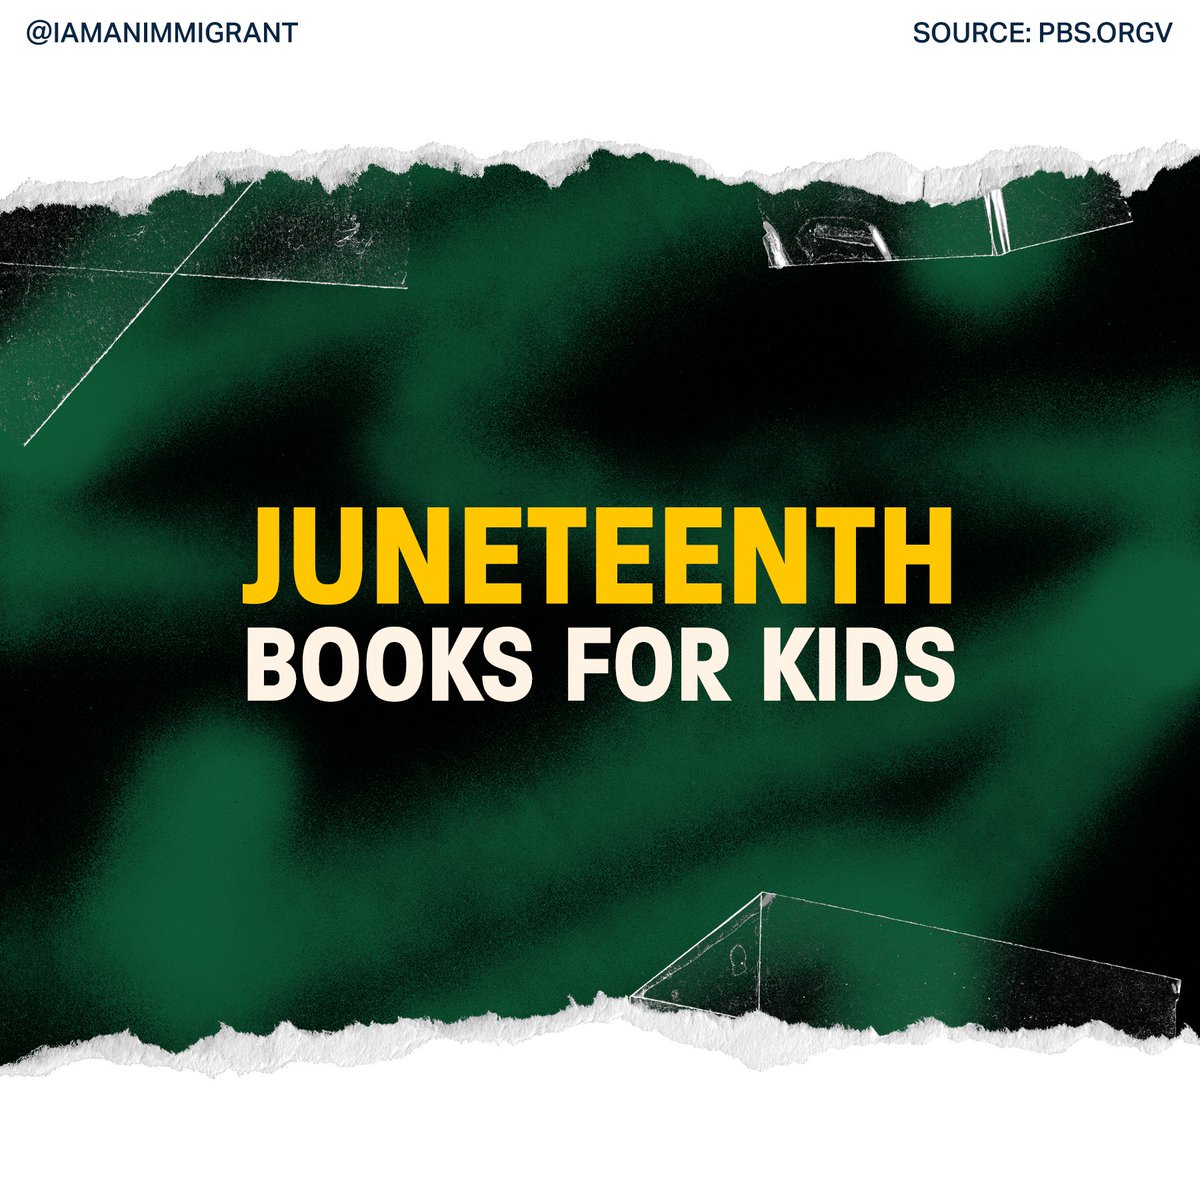 Add these fantastic books to your #SummerReading list. 📚

They include stories of history and knowledge to pass on to the next generation. Happy #Juneteenth2023!